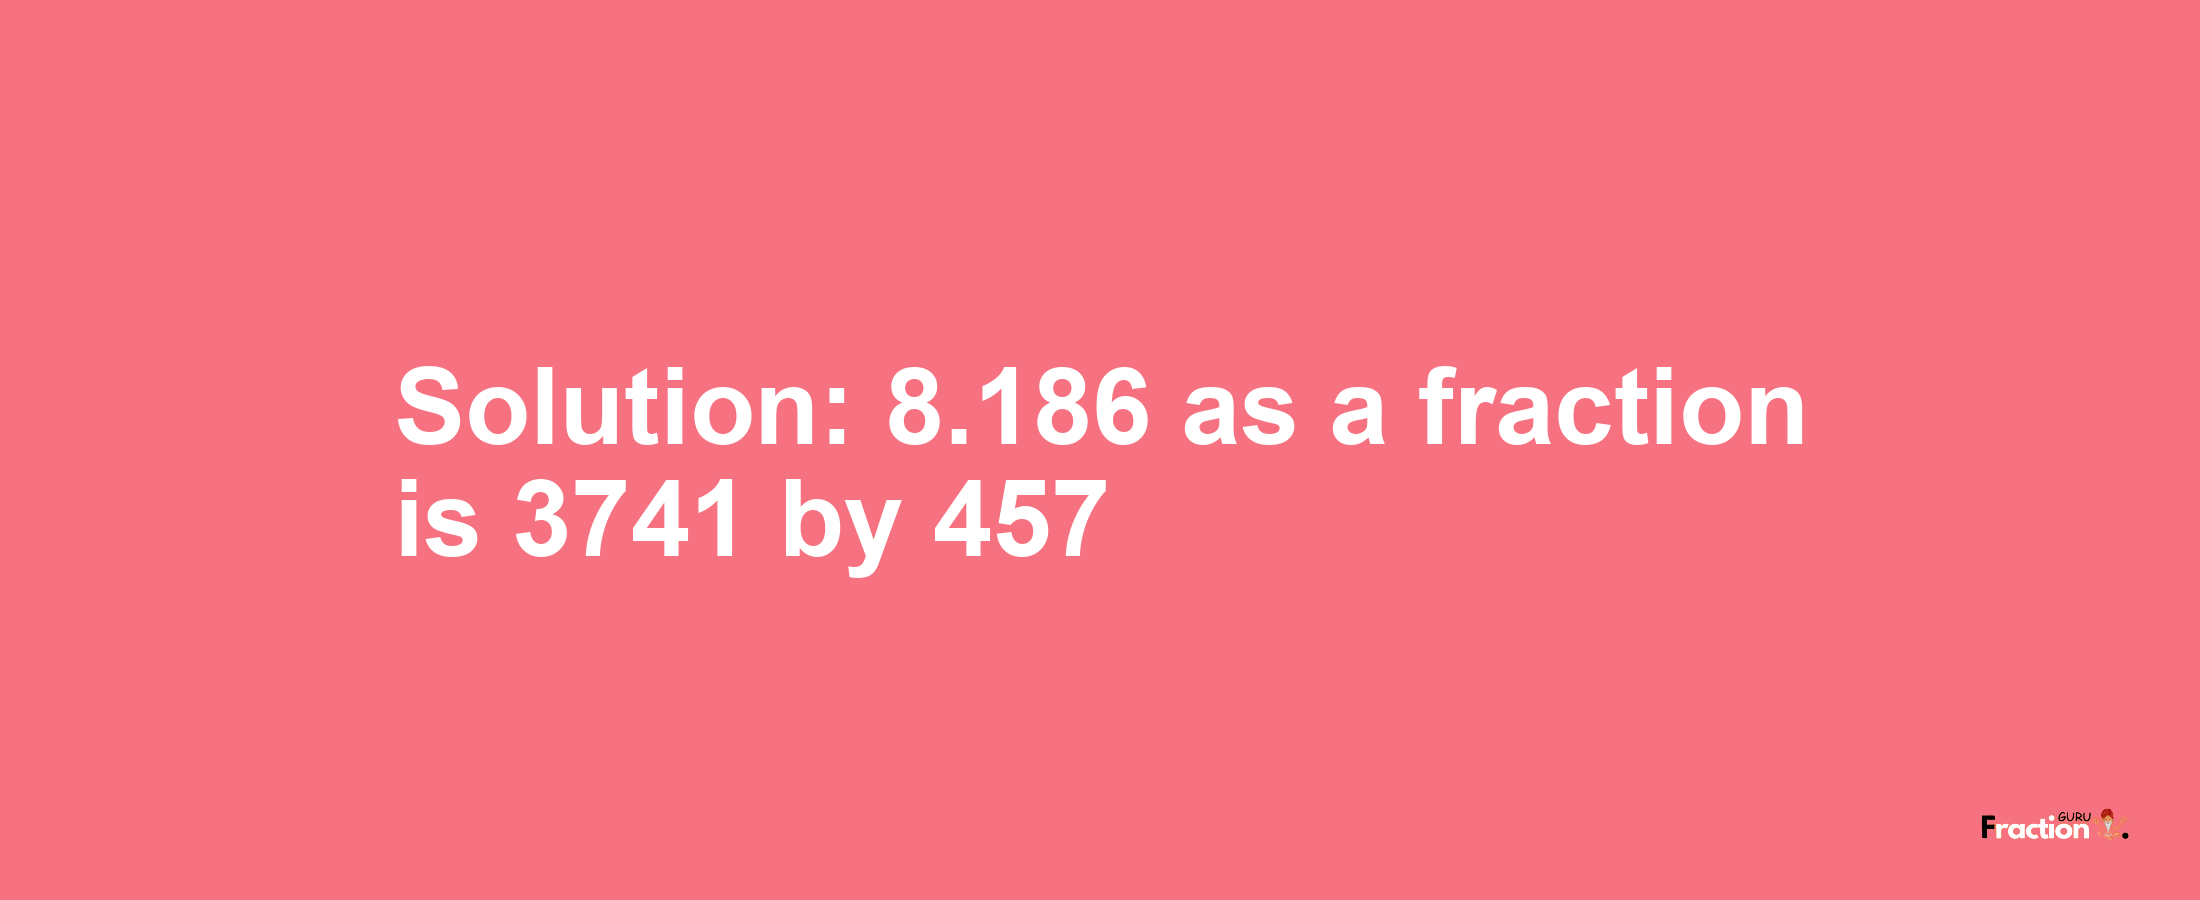 Solution:8.186 as a fraction is 3741/457